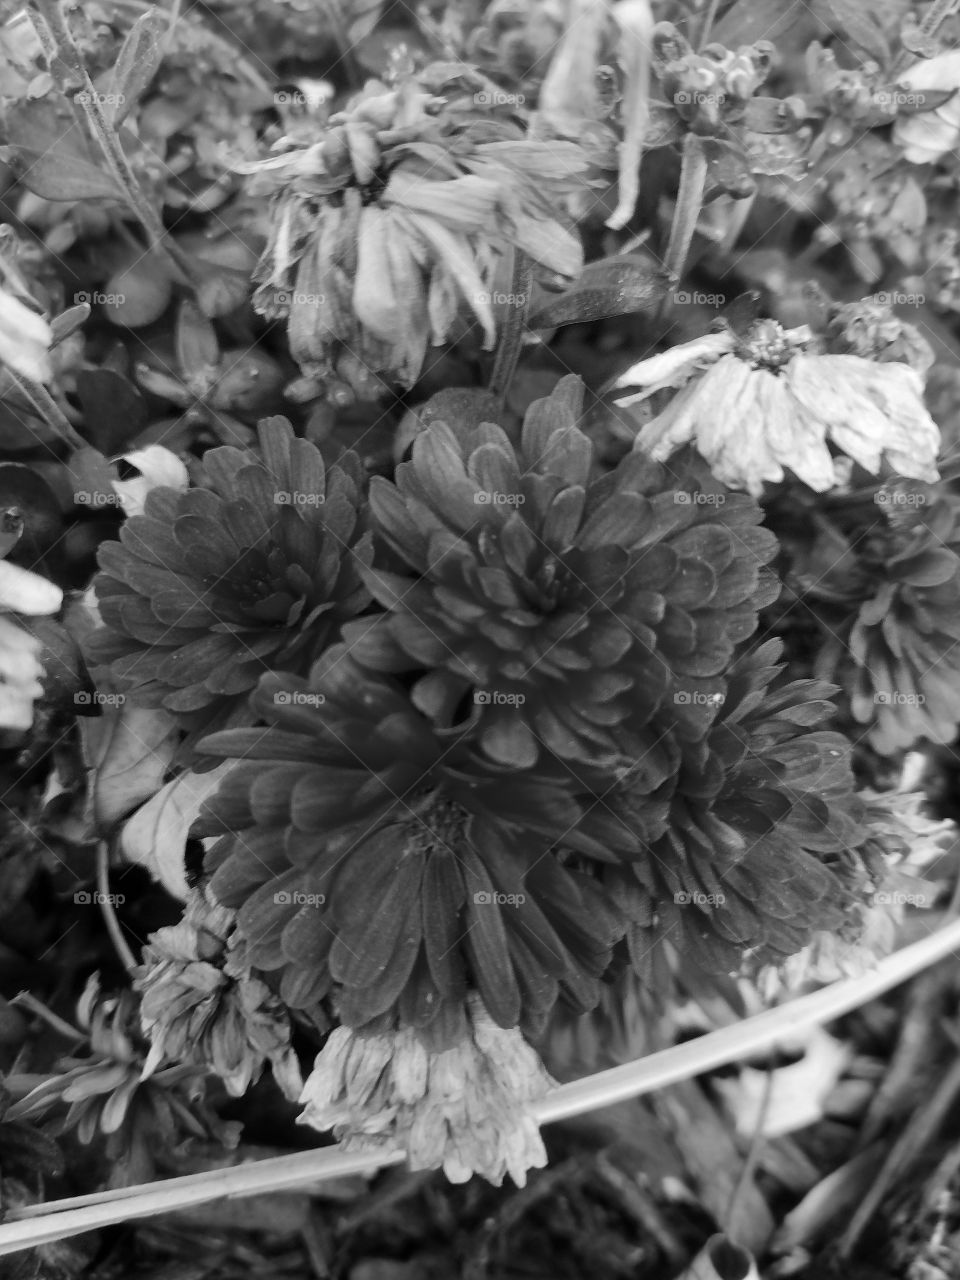 Unfiltered, beautiful, lovely close-up of black and white flowers in a flower bed